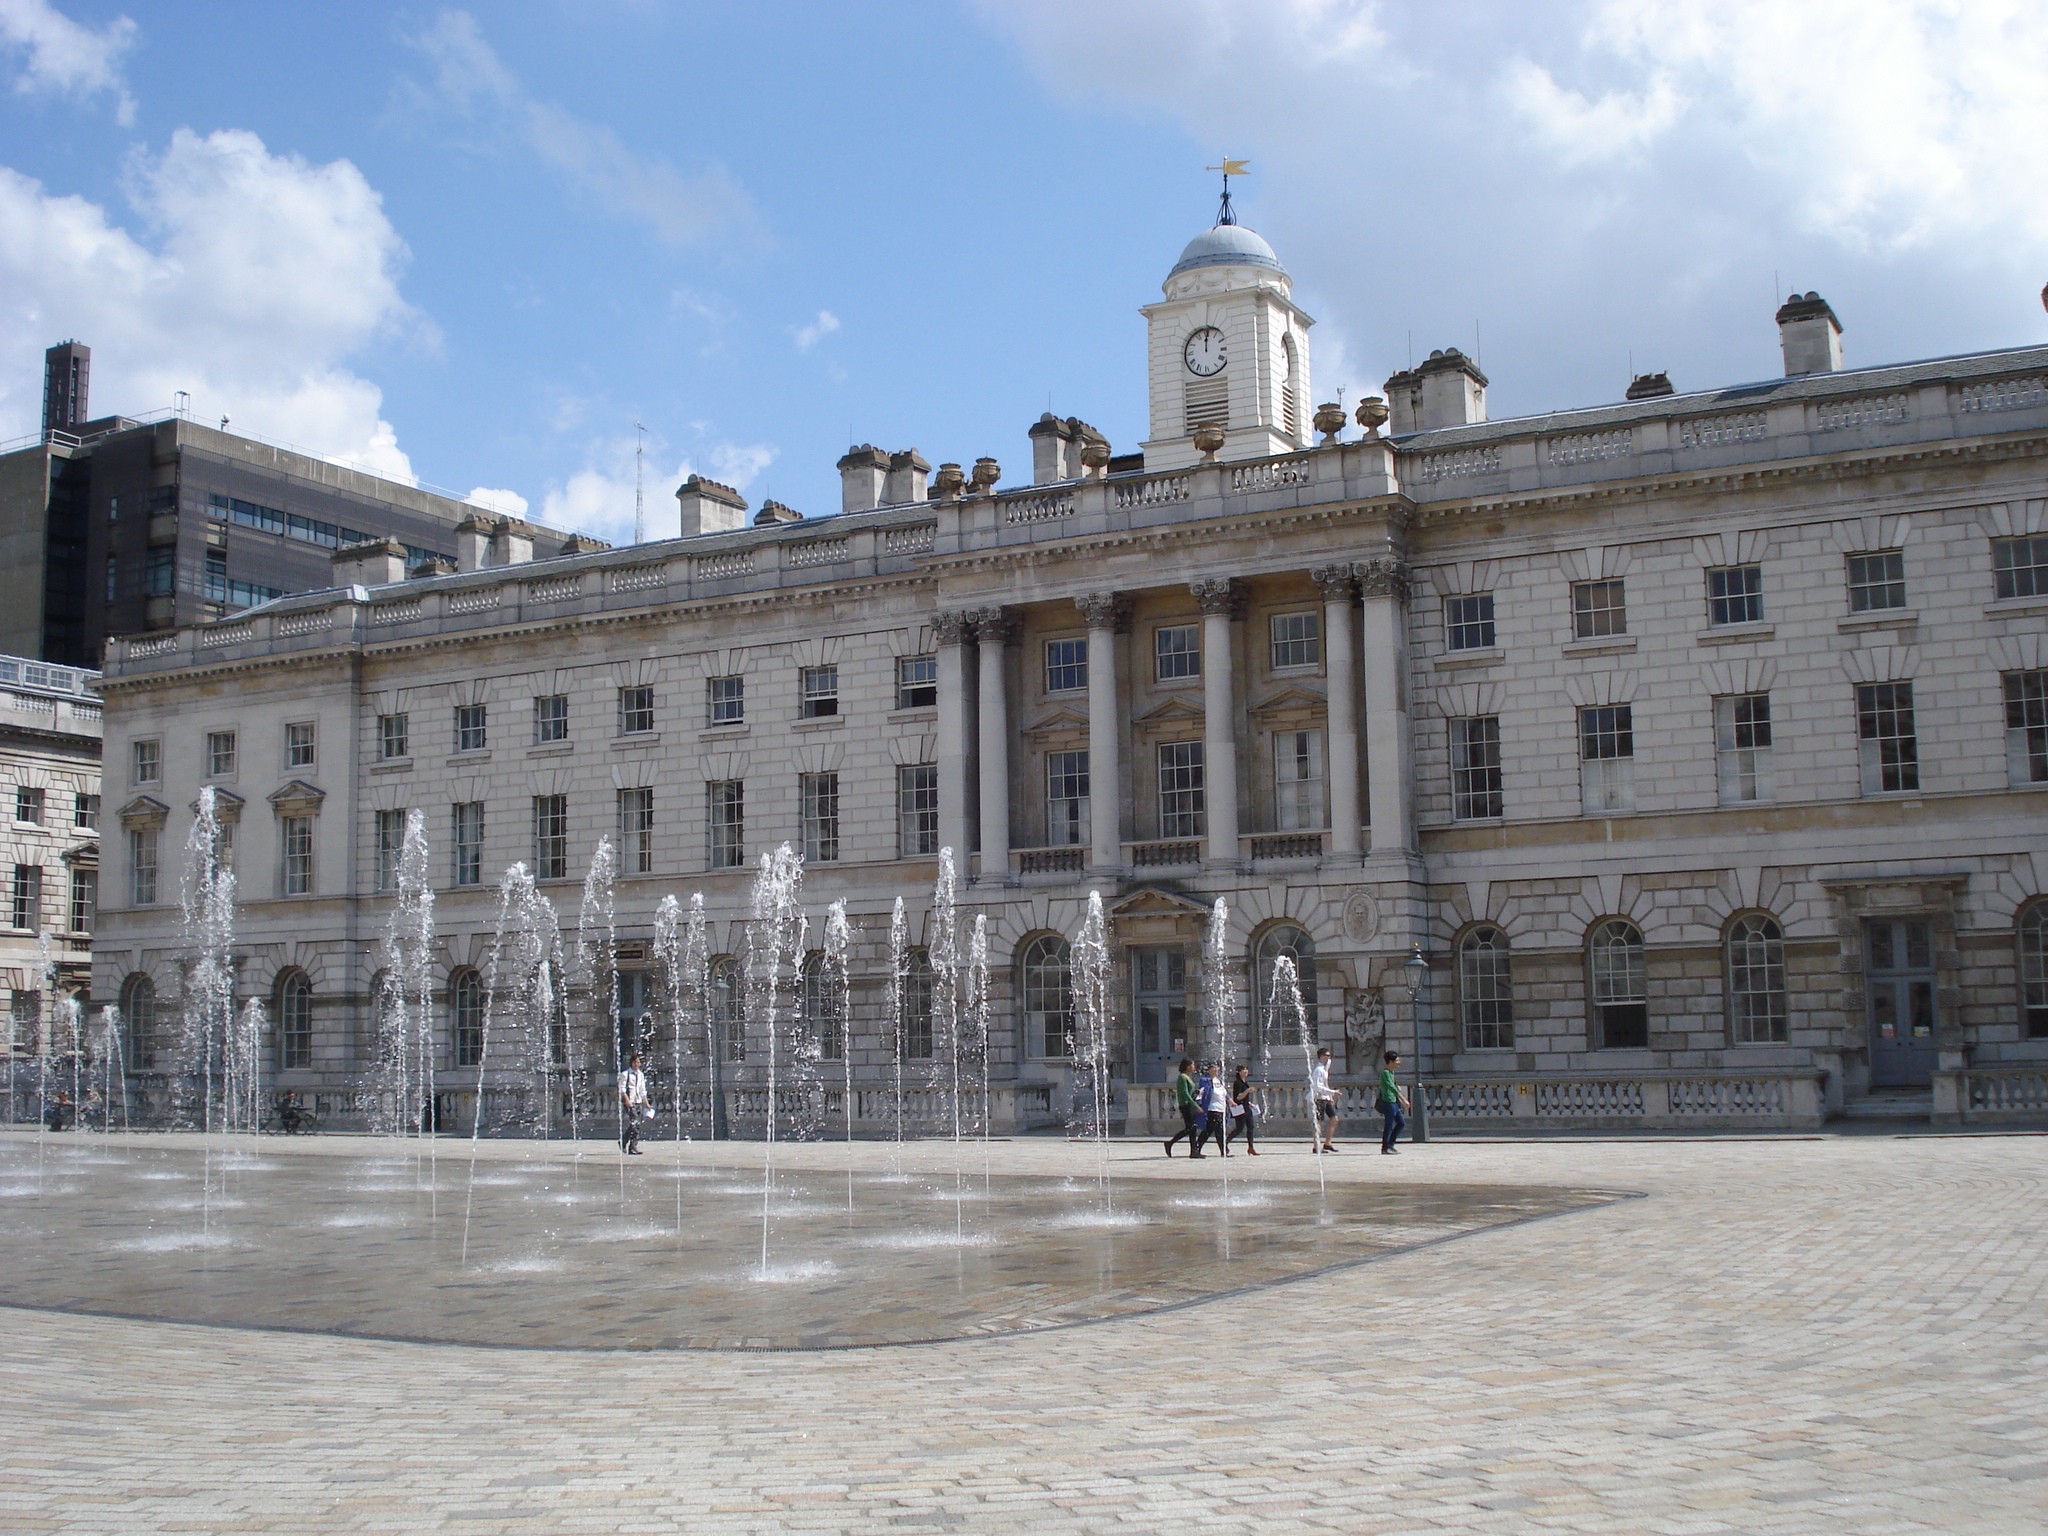 Download this Somerset House Fountains picture